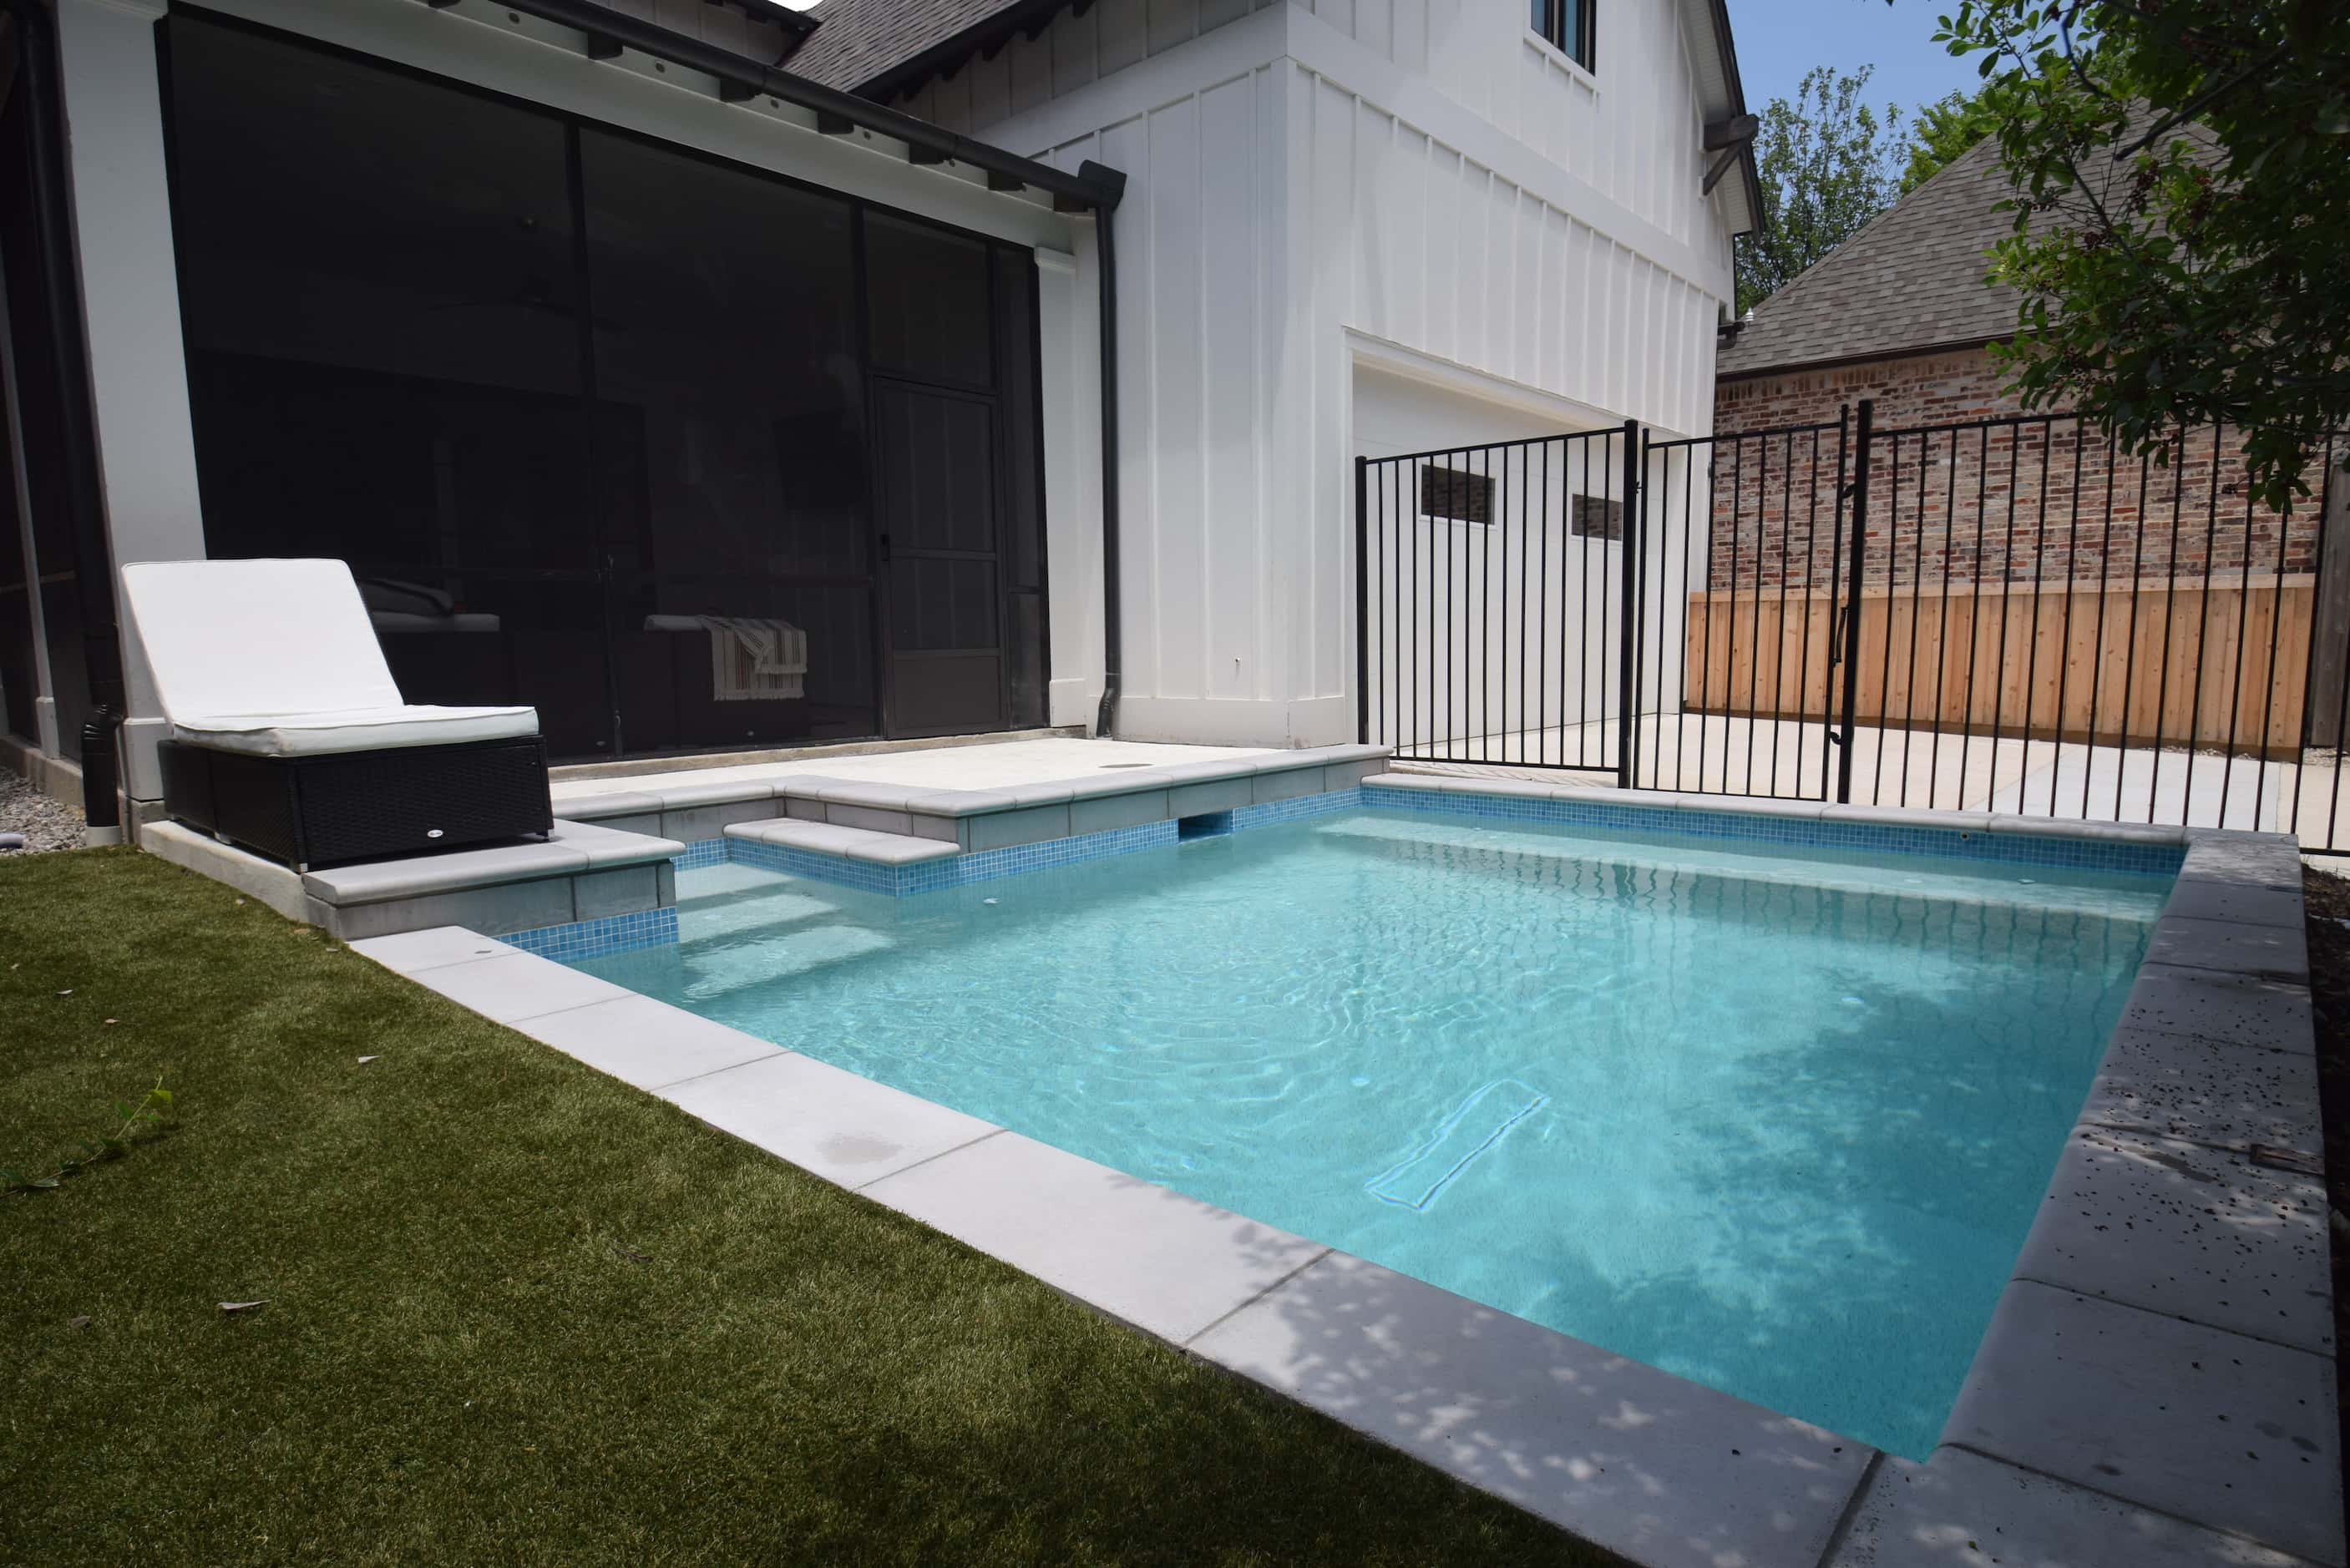 A custom builder will tailor the pool to your yard and needs. It can be a classic,...